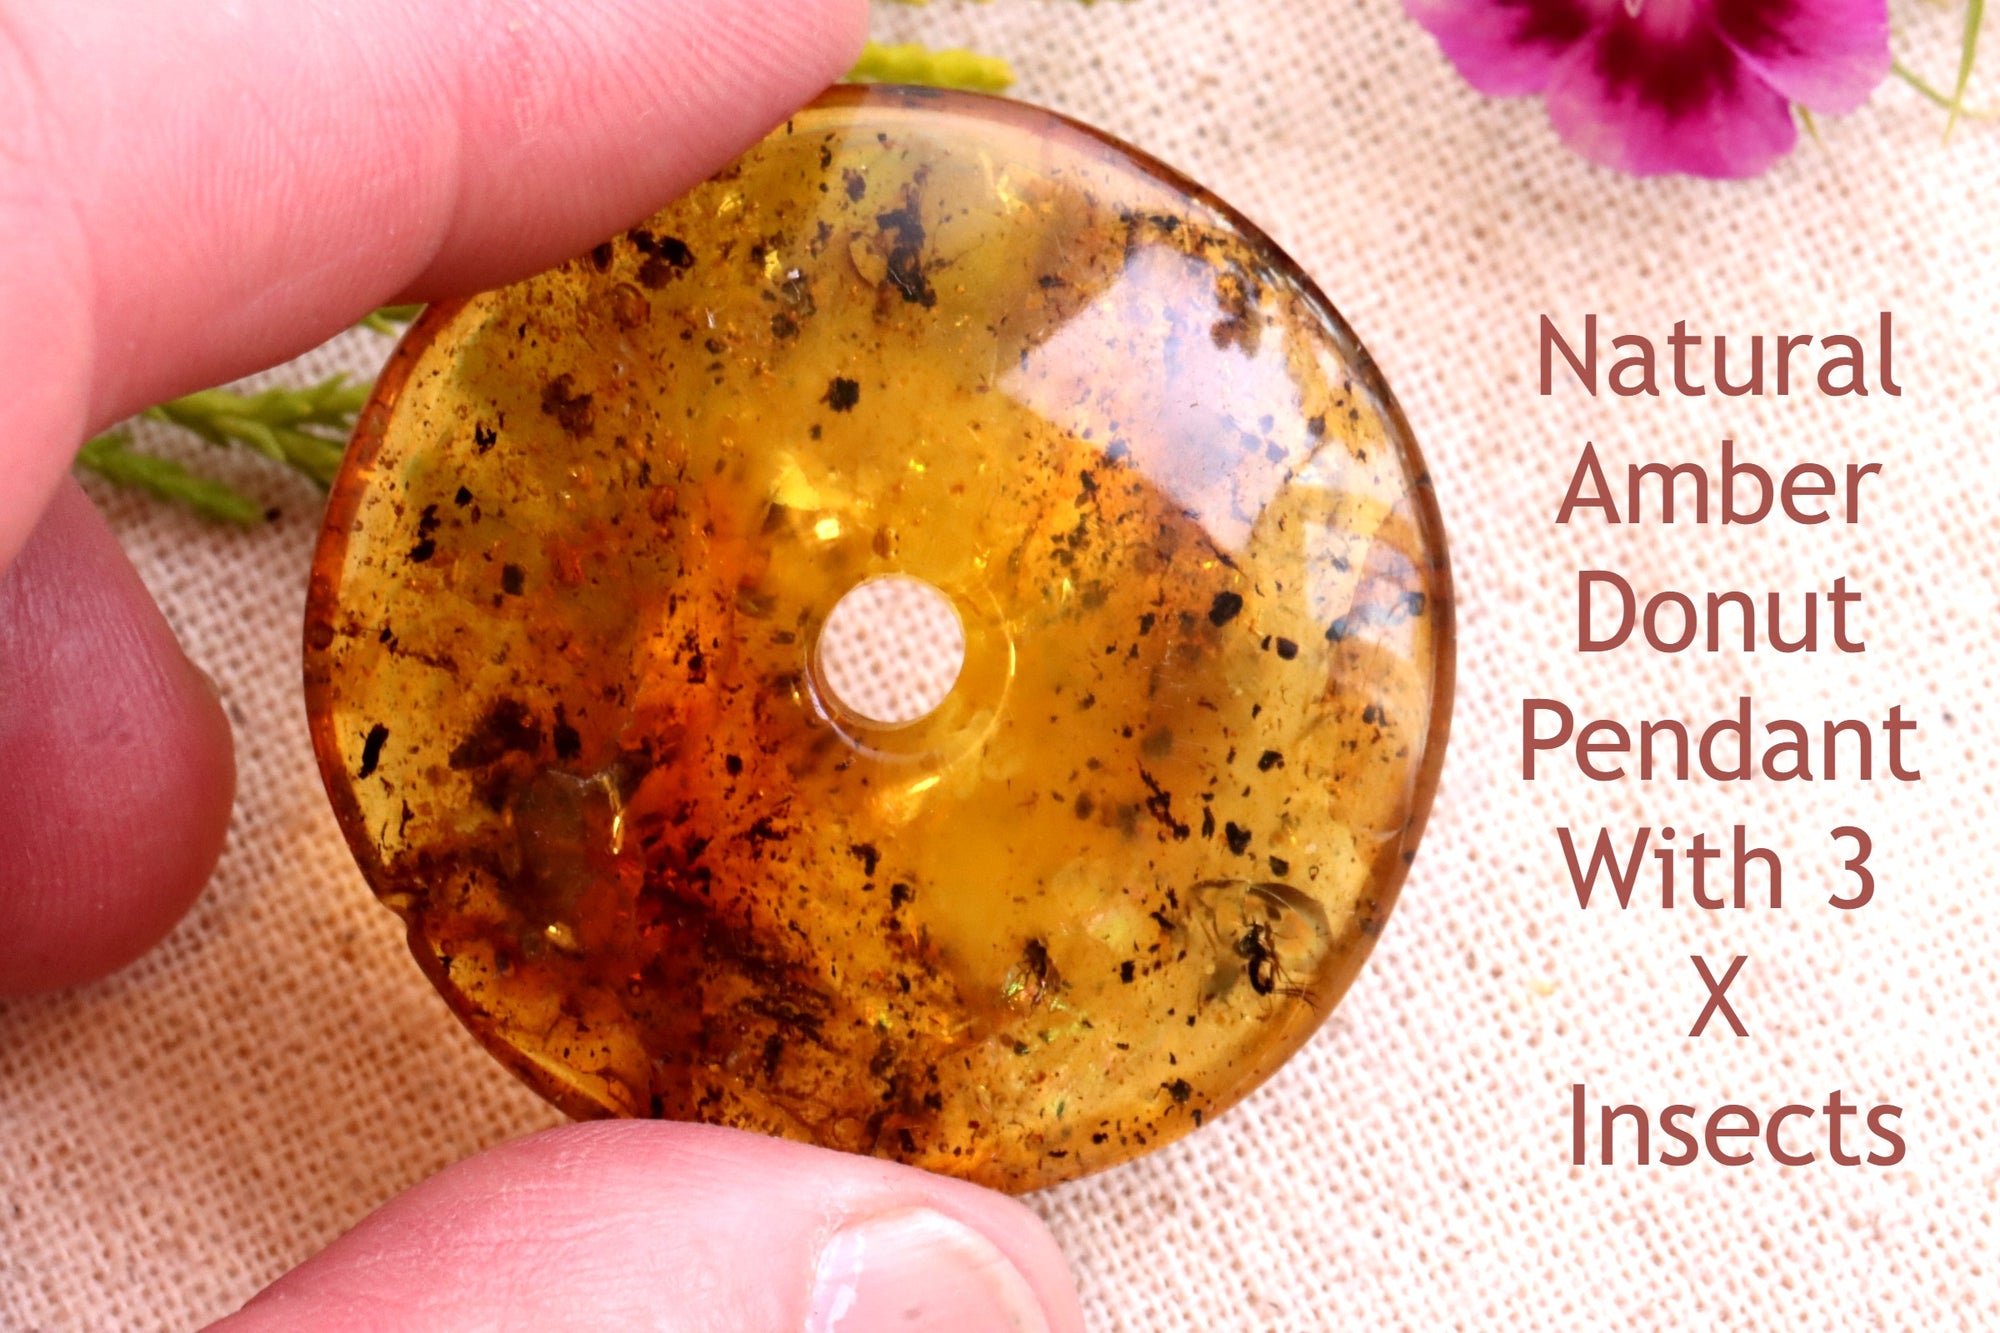 Unique Insects in Baltic Amber Amulet